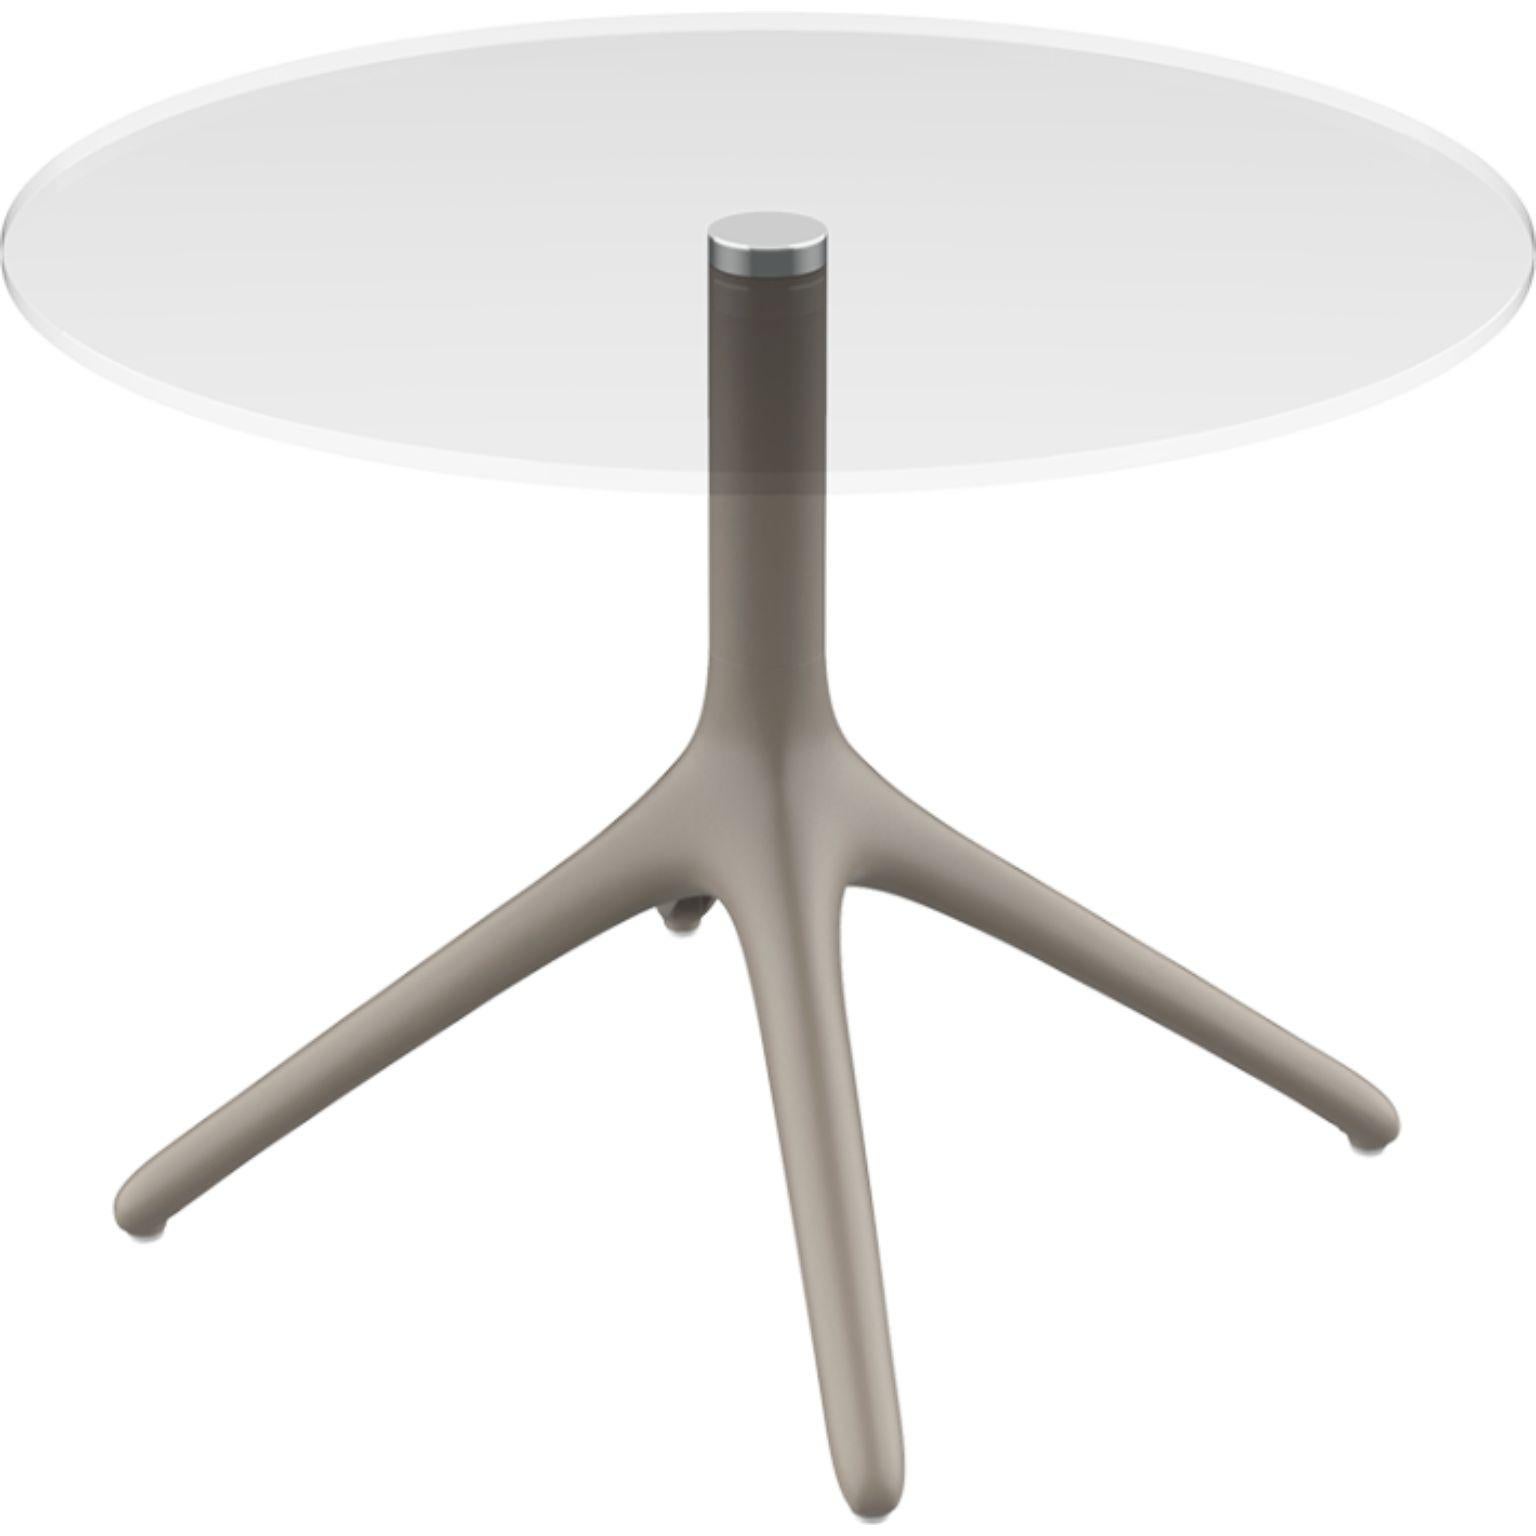 Uni cream table 50 by Mowee.
Dimensions: D45.5 x H50 cm.
Material: Aluminium, tempered glass.
Weight: 5 kg.
Also Available in different colours and finishes. Collapsable version available.

A table designed to be as versatile as possible and